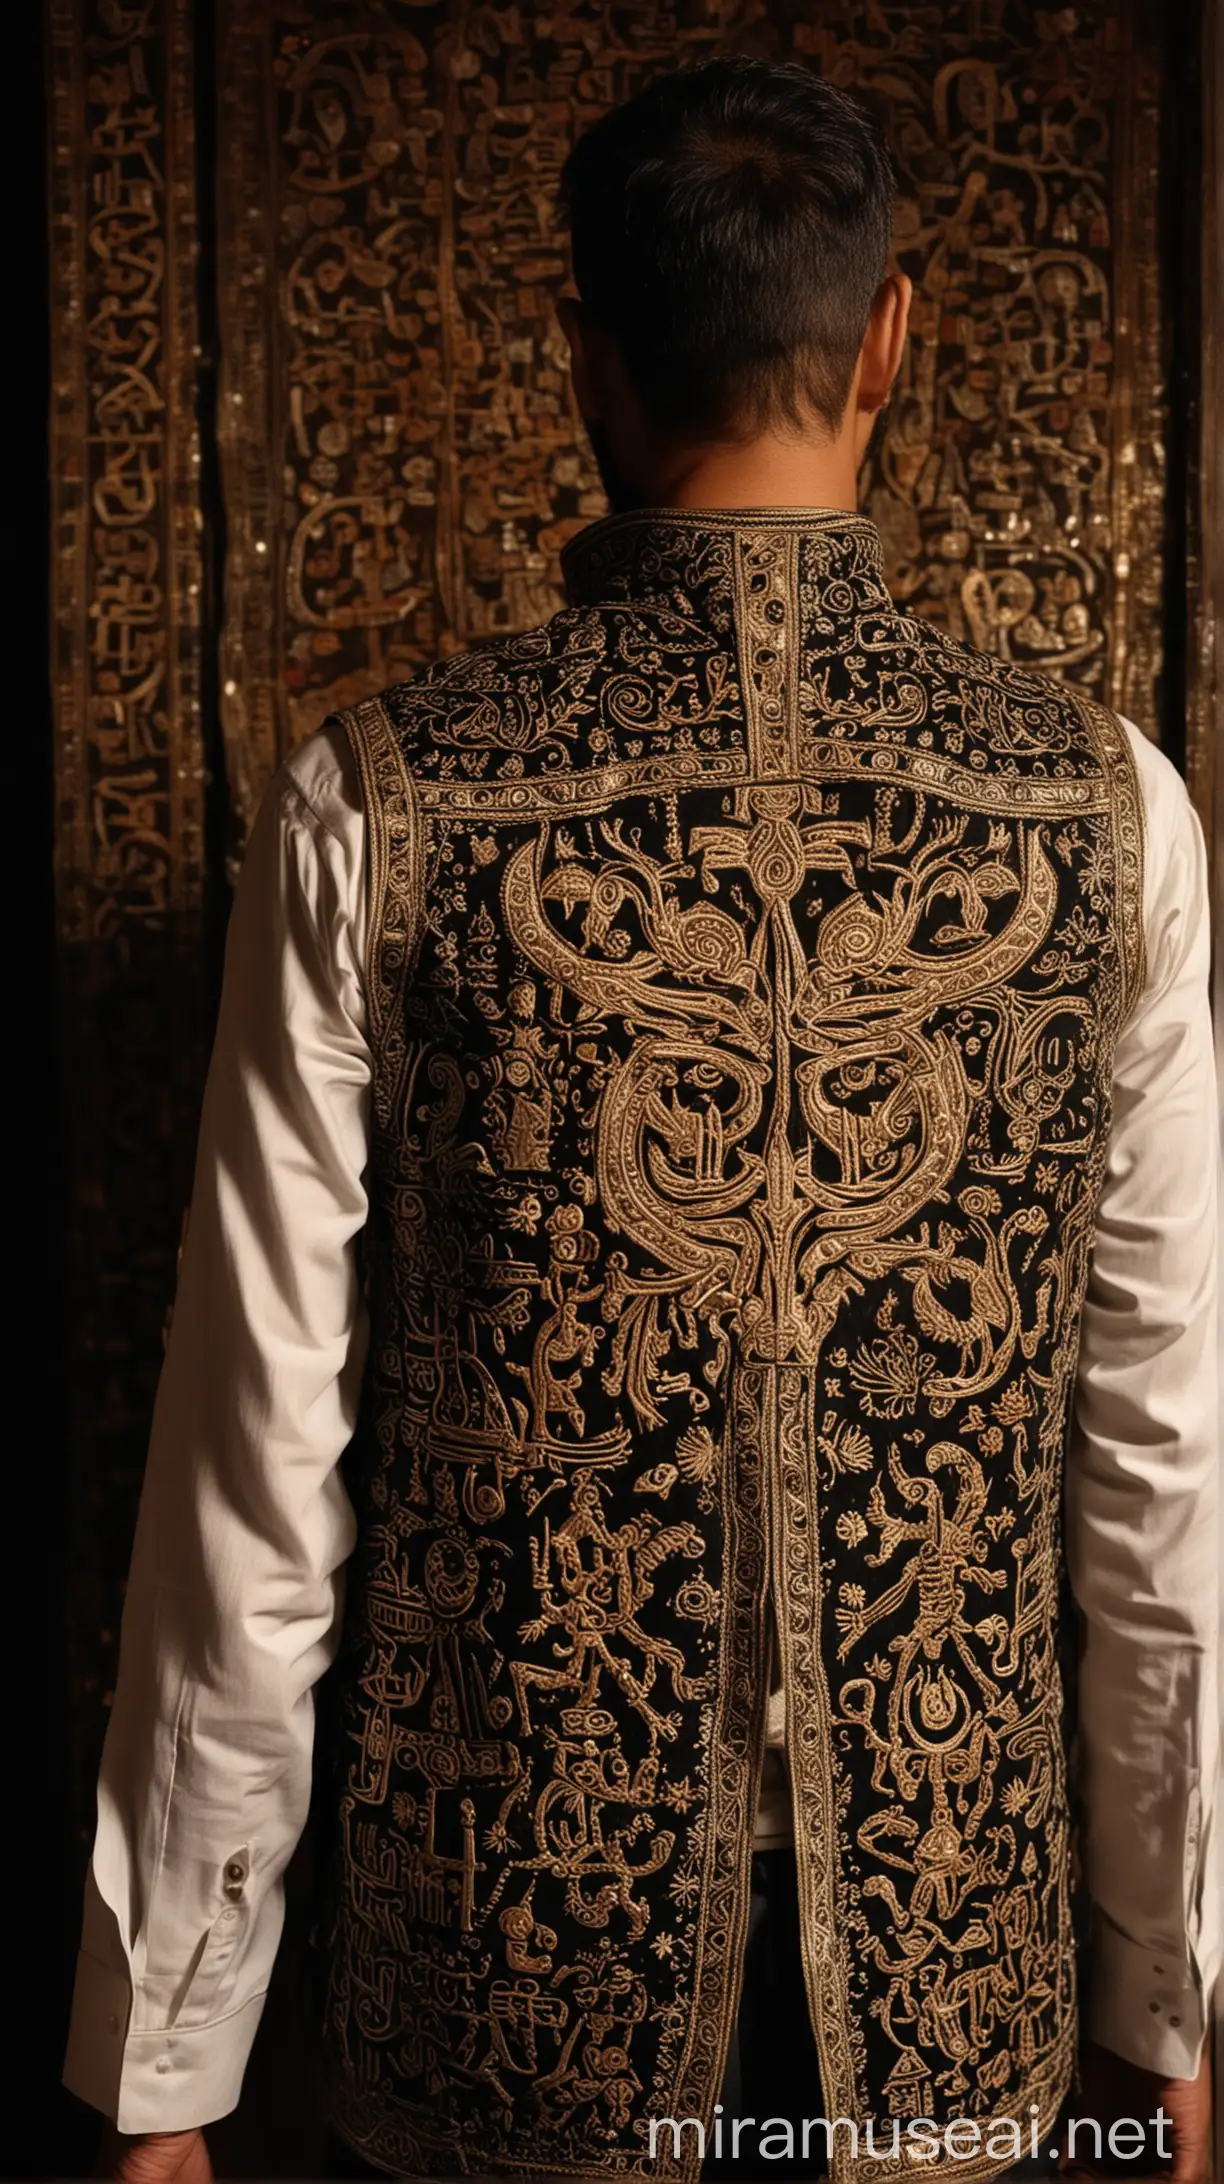 Khidr Aleyhisselam gently placing a glowing, ornate vest onto the man's shoulders. The vest is adorned with intricate patterns and symbols, indicating its sacred significance. The man looks down at the vest in amazement, feeling a sense of readiness and empowerment. ıslam
